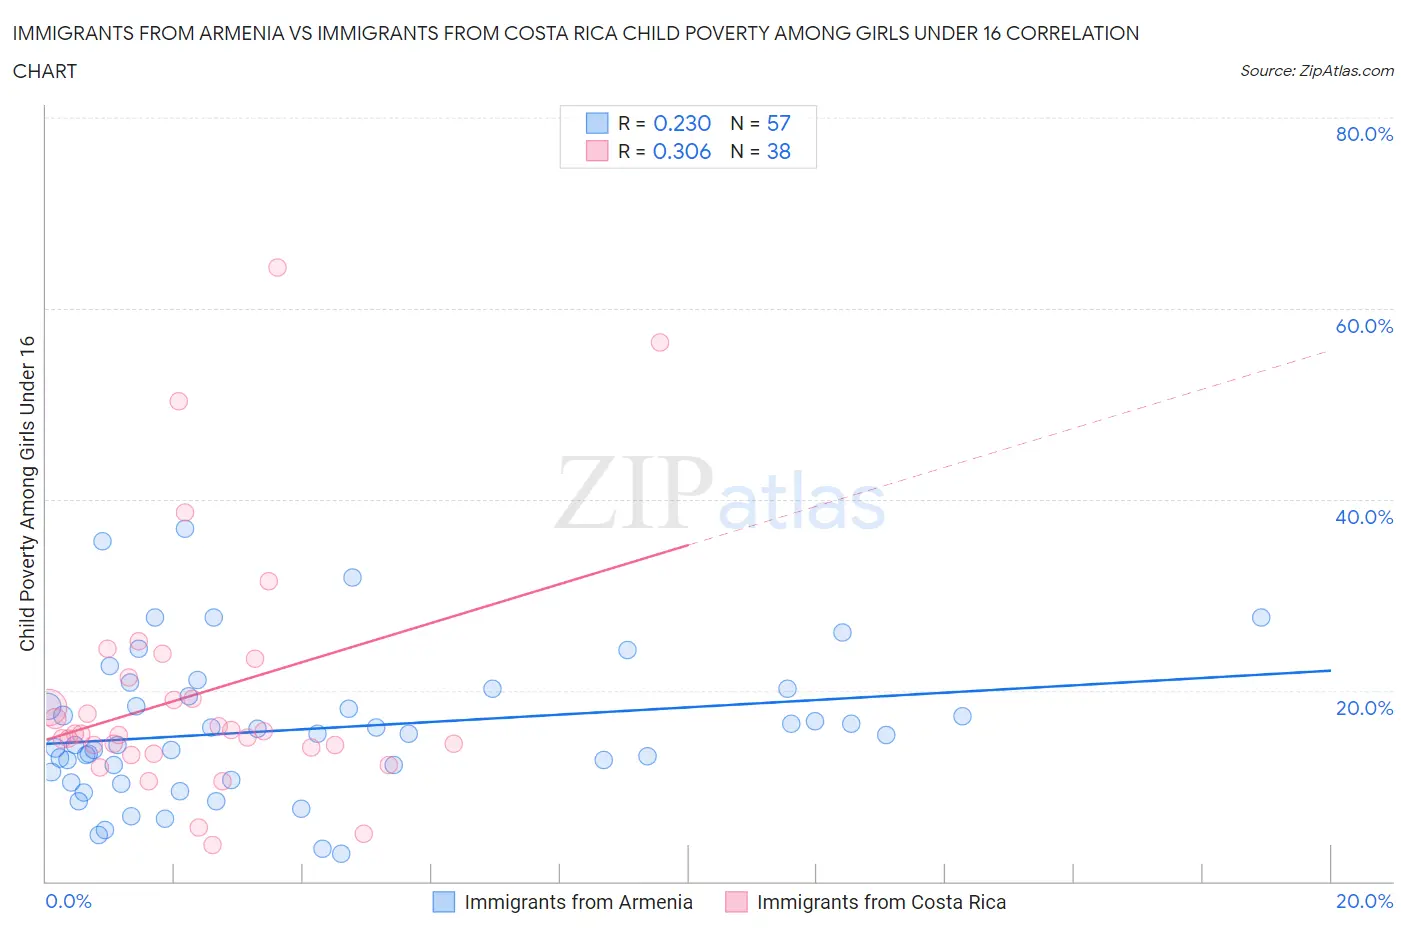 Immigrants from Armenia vs Immigrants from Costa Rica Child Poverty Among Girls Under 16